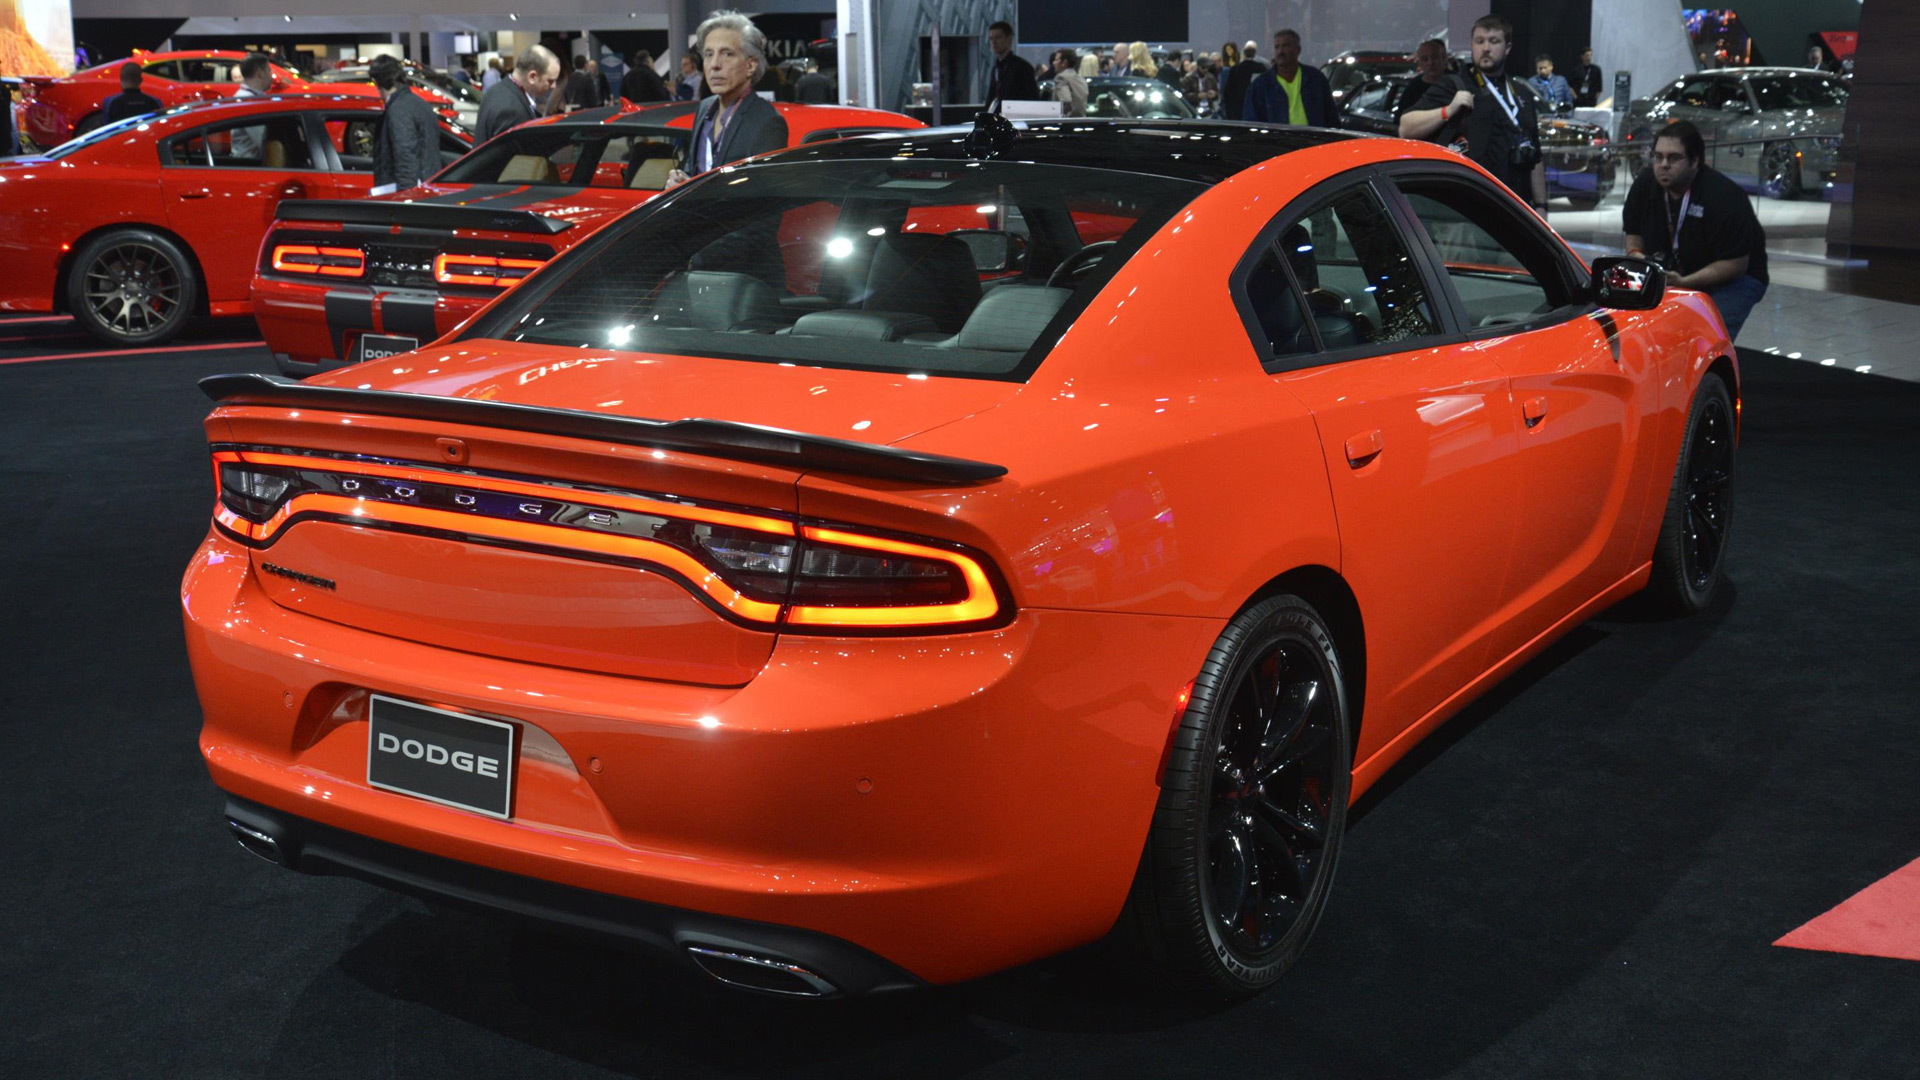 2016 Dodge Challenger and Charger in Go Mango, 2016 New York Auto Show